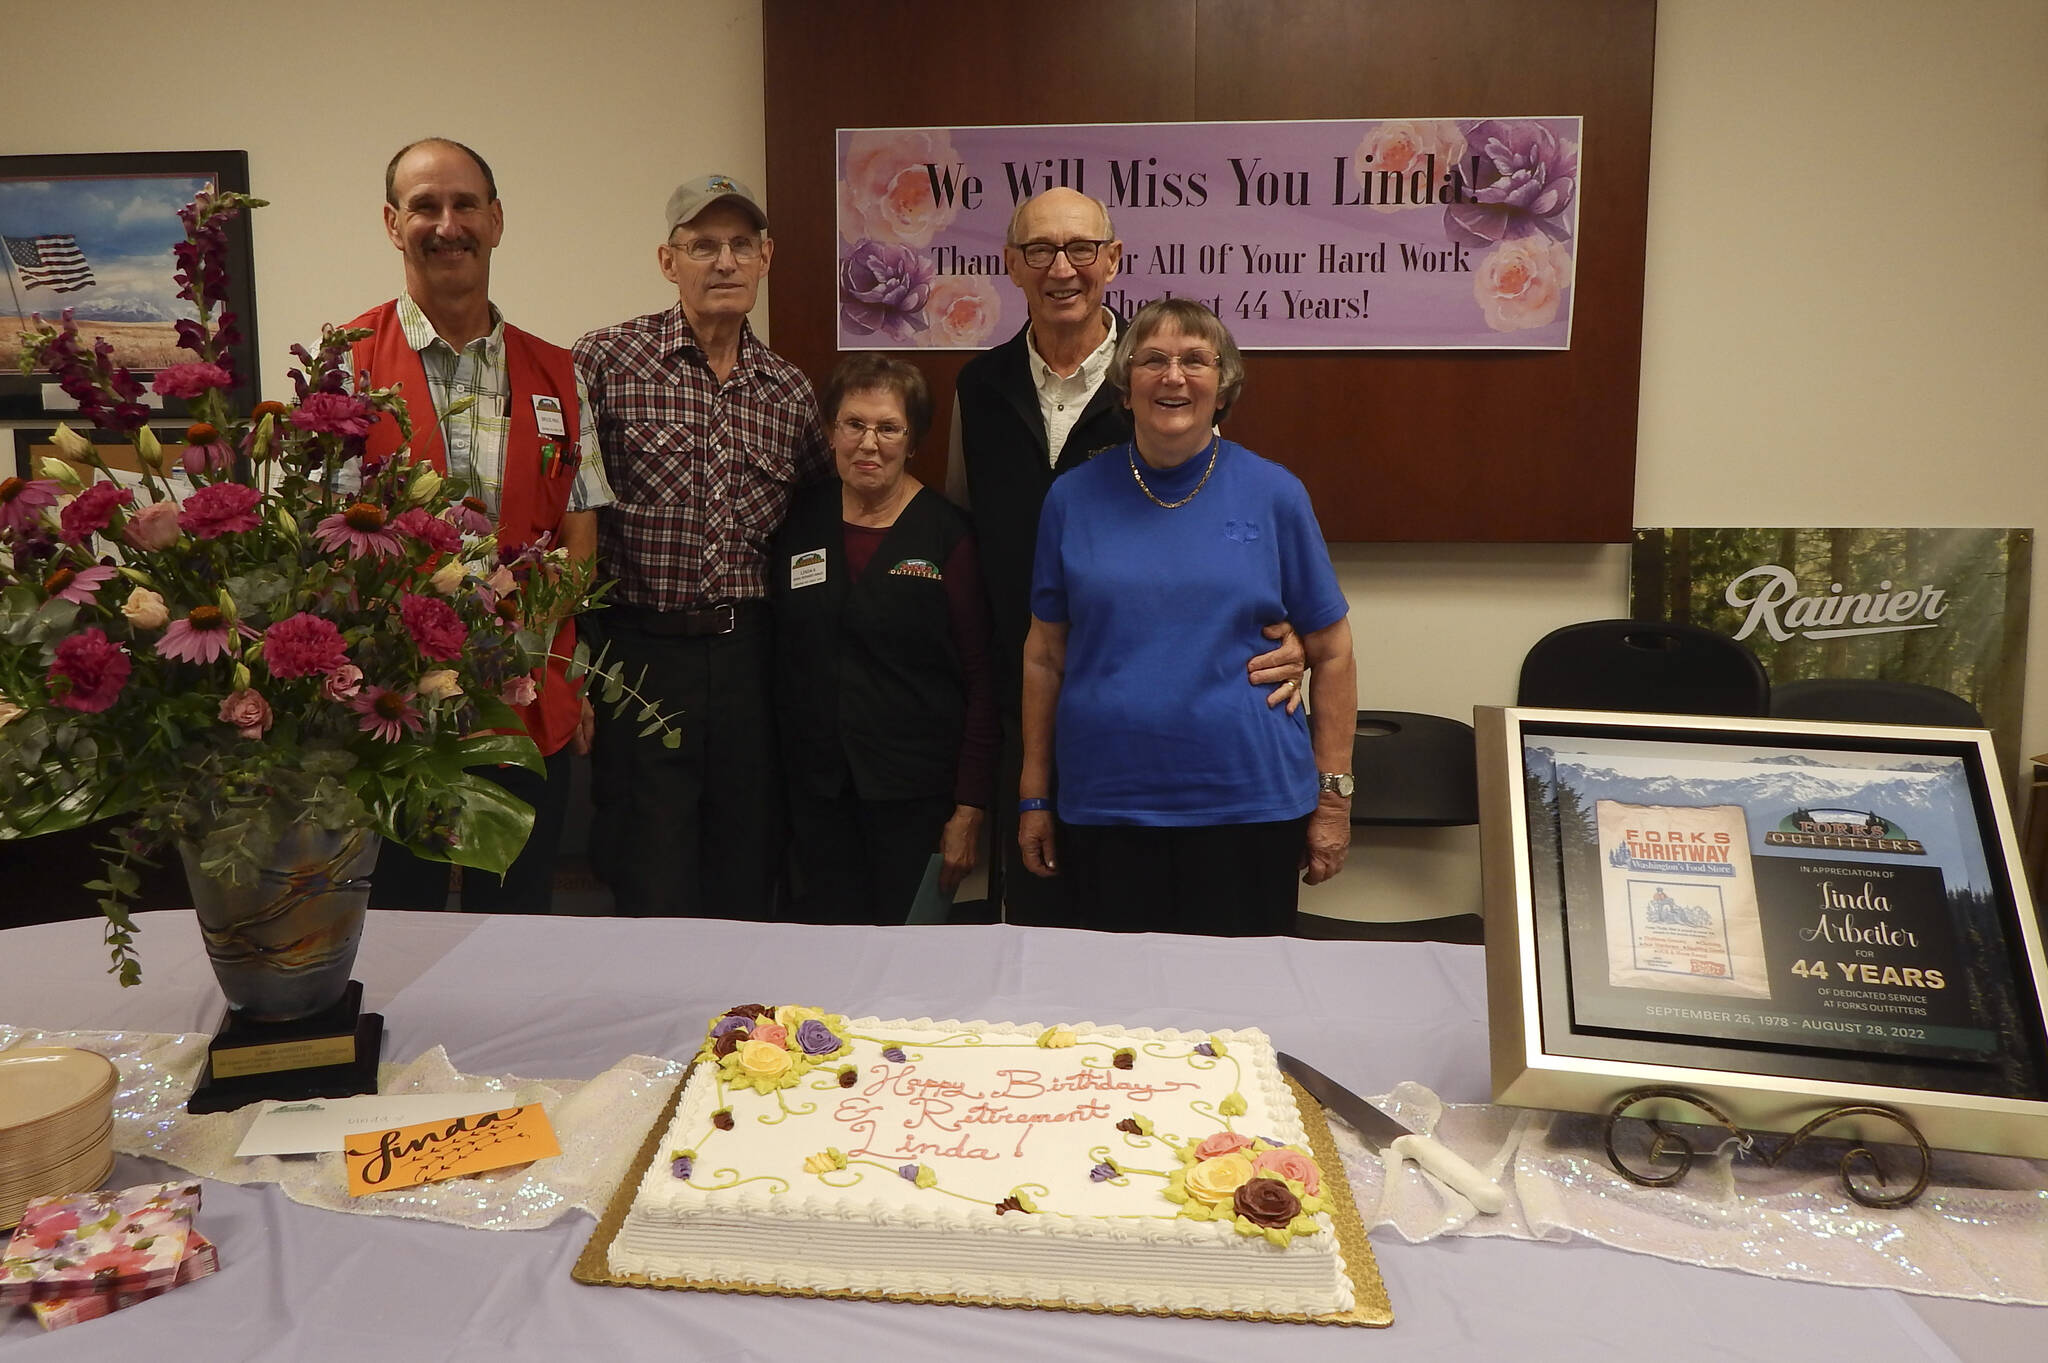 Bruce Paul, Phil Arbeiter, Linda, and former Outfitter’s owners Bert and Martha Paul stand behind the flowers, cake and beautiful plaque that were bestowed on Linda last Friday. It was also her birthday!